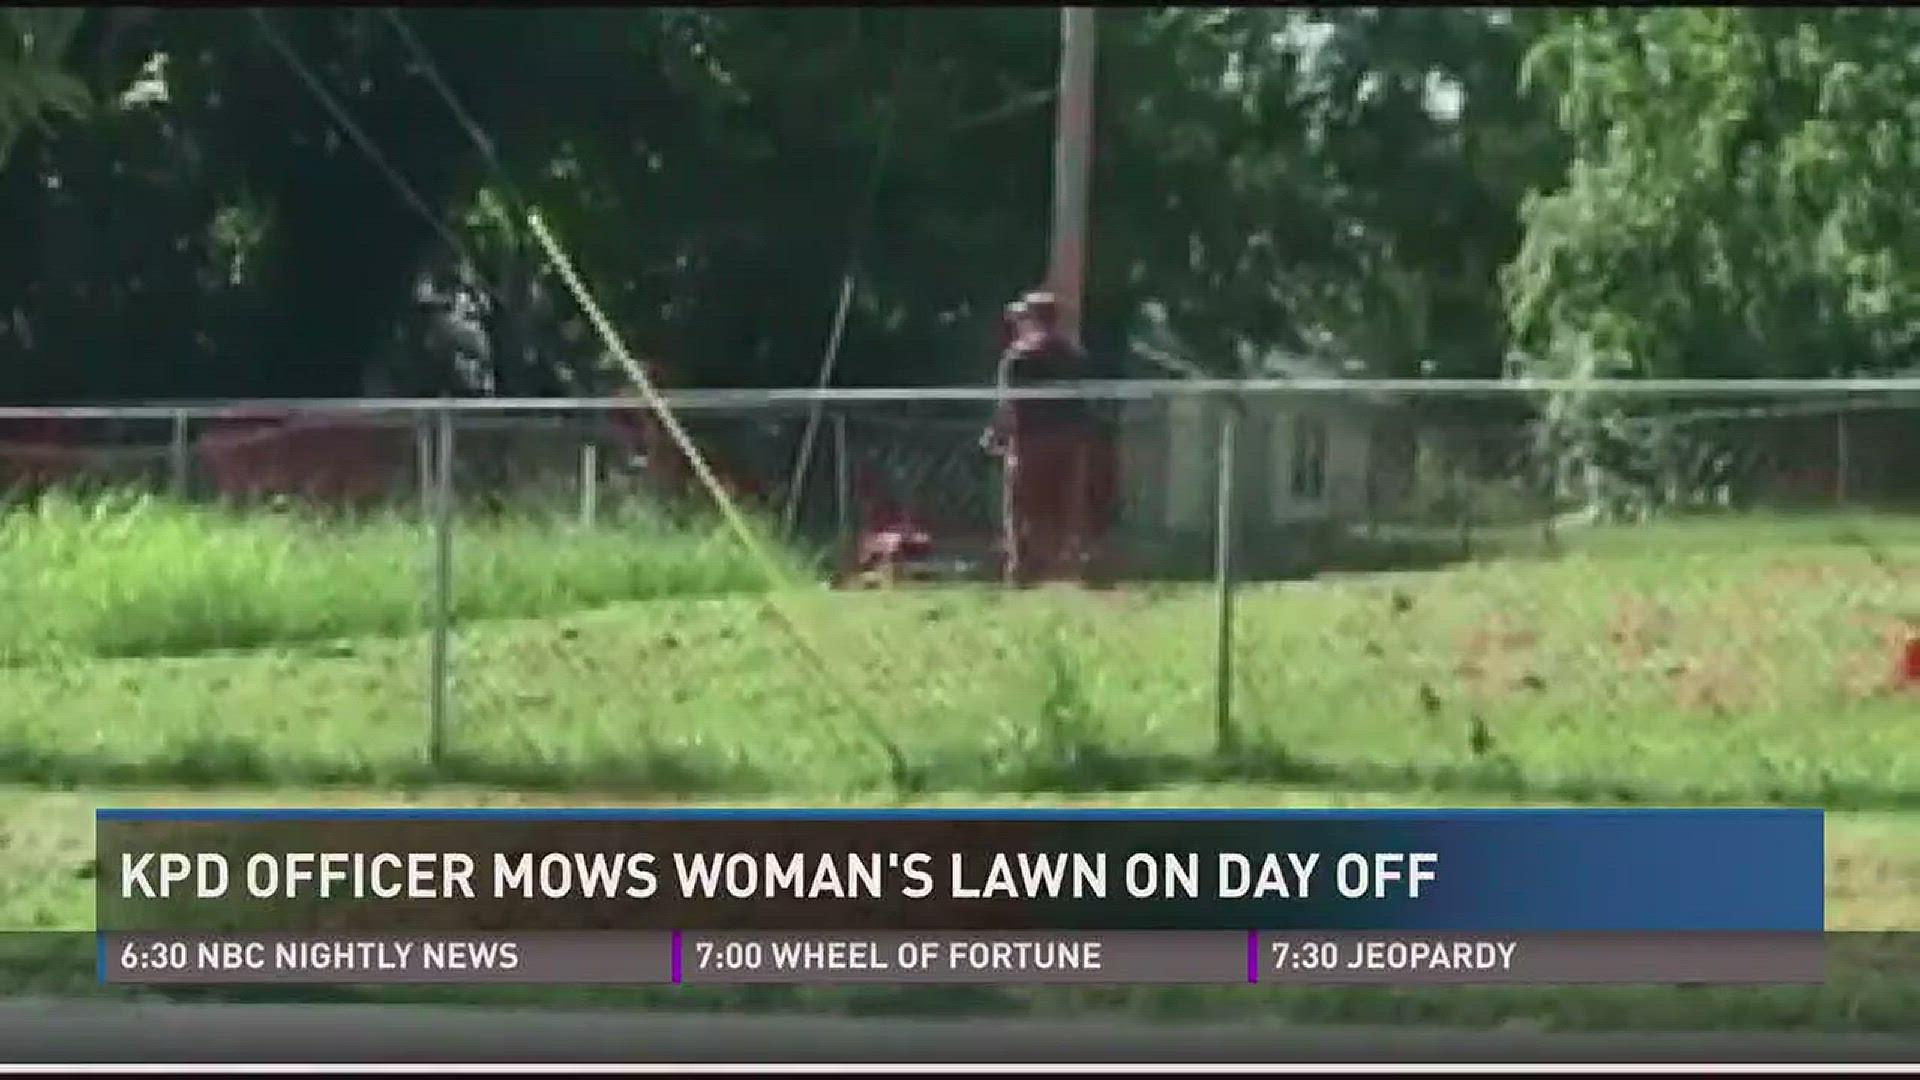 Aug. 16, 2017: A Knoxville police officer spends his day off mowing the lawn for someone who couldn't do it herself.